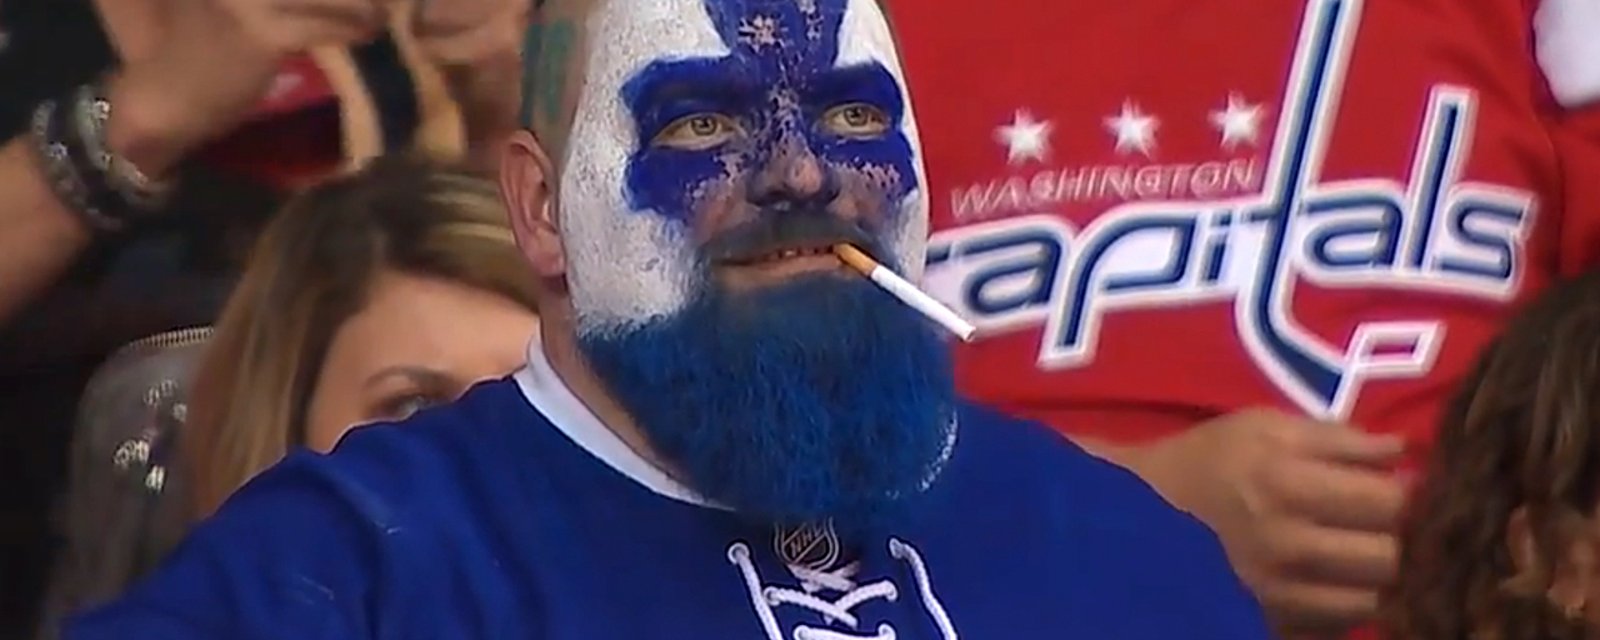 Dart Guy will be rich following instant fame! 